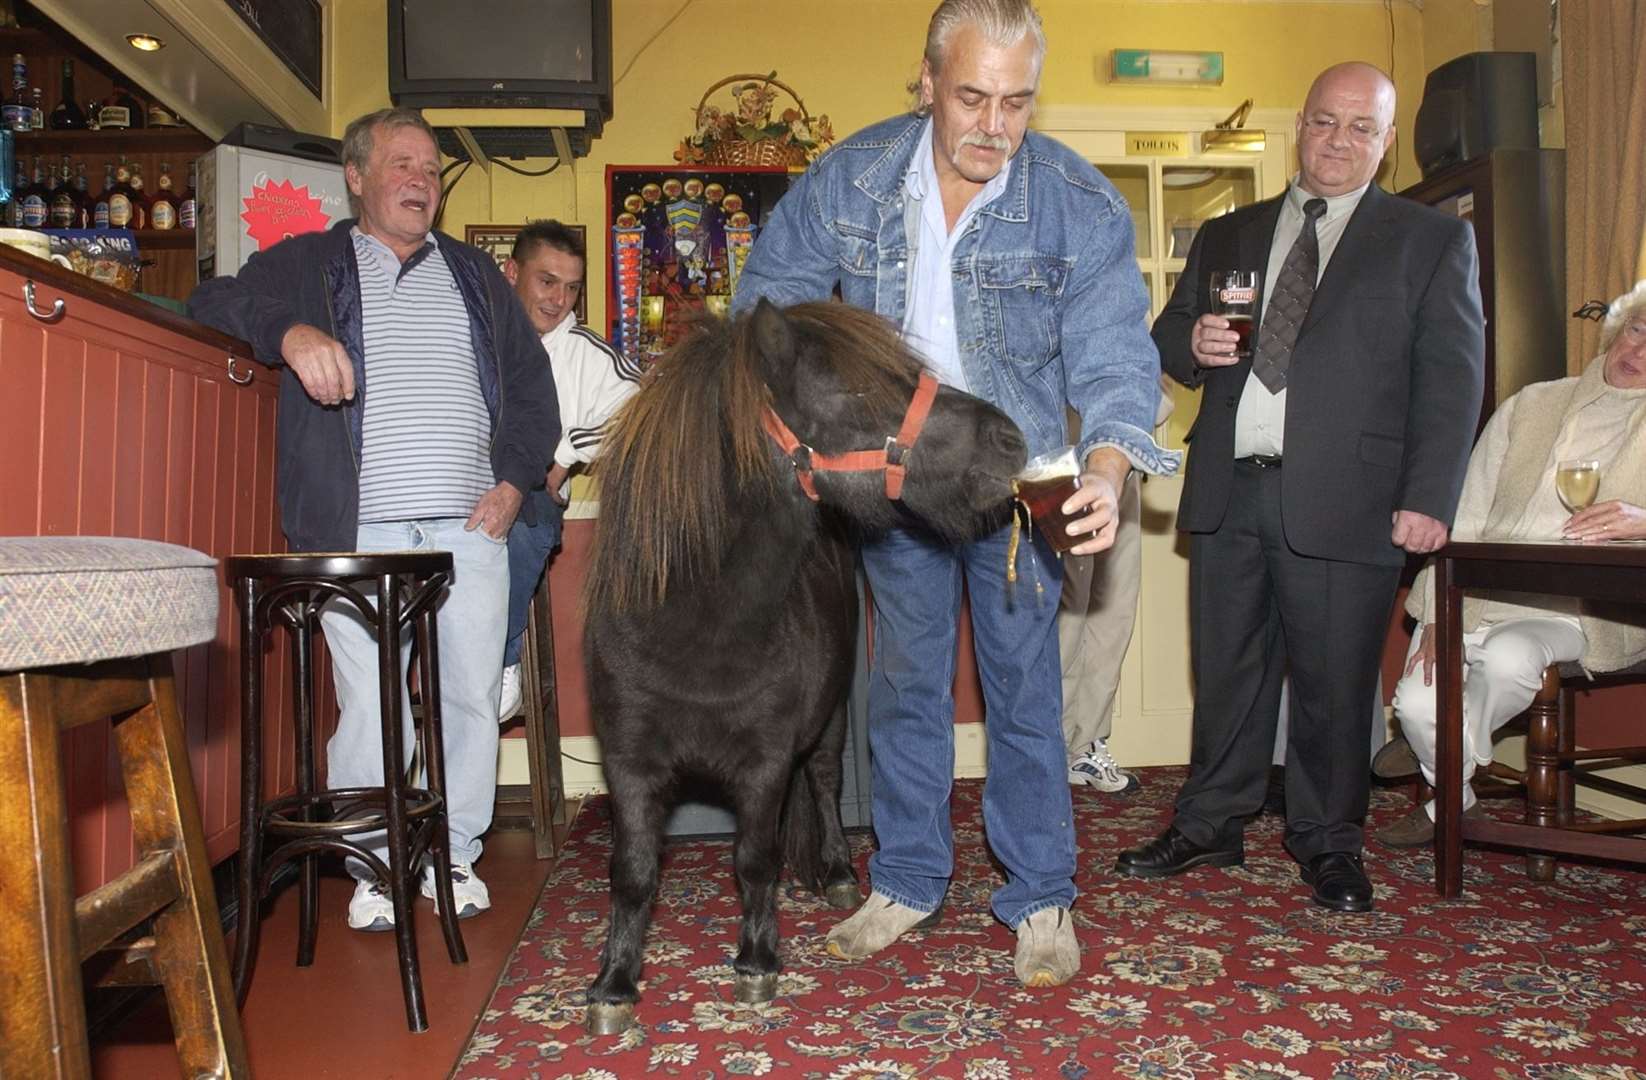 Sparky the Shetland pony with John Baldwin at the Warren pub in New Romney in October 2013. The pub is still going today. Picture: Terry Scott